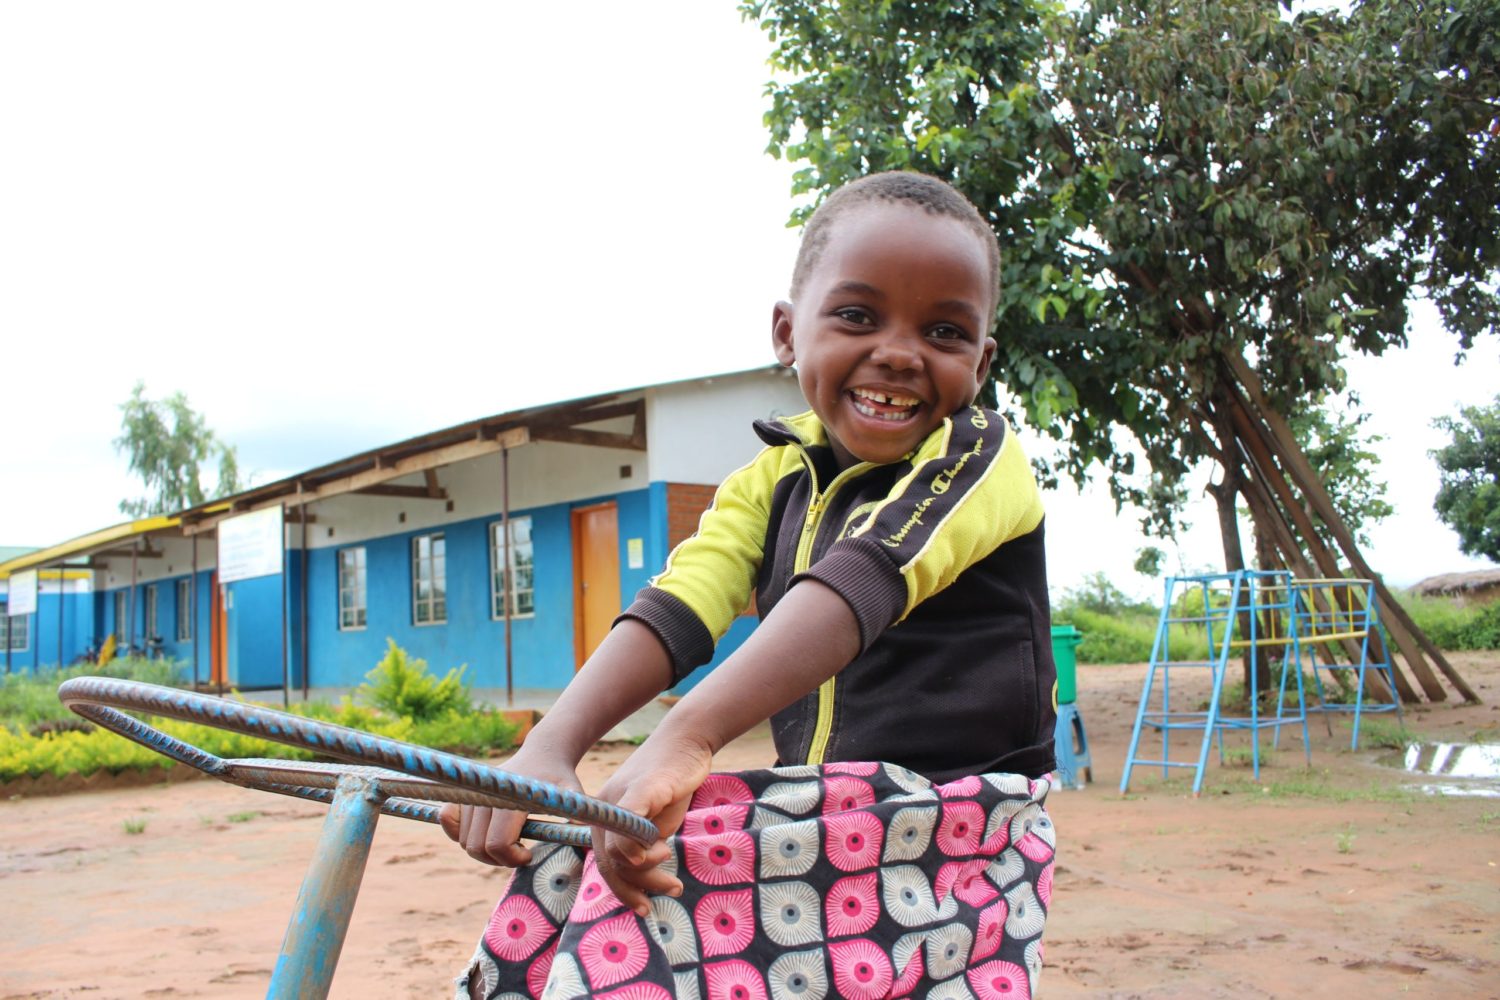 photo of a boy in Malawi sitting on a bicycle and smiling